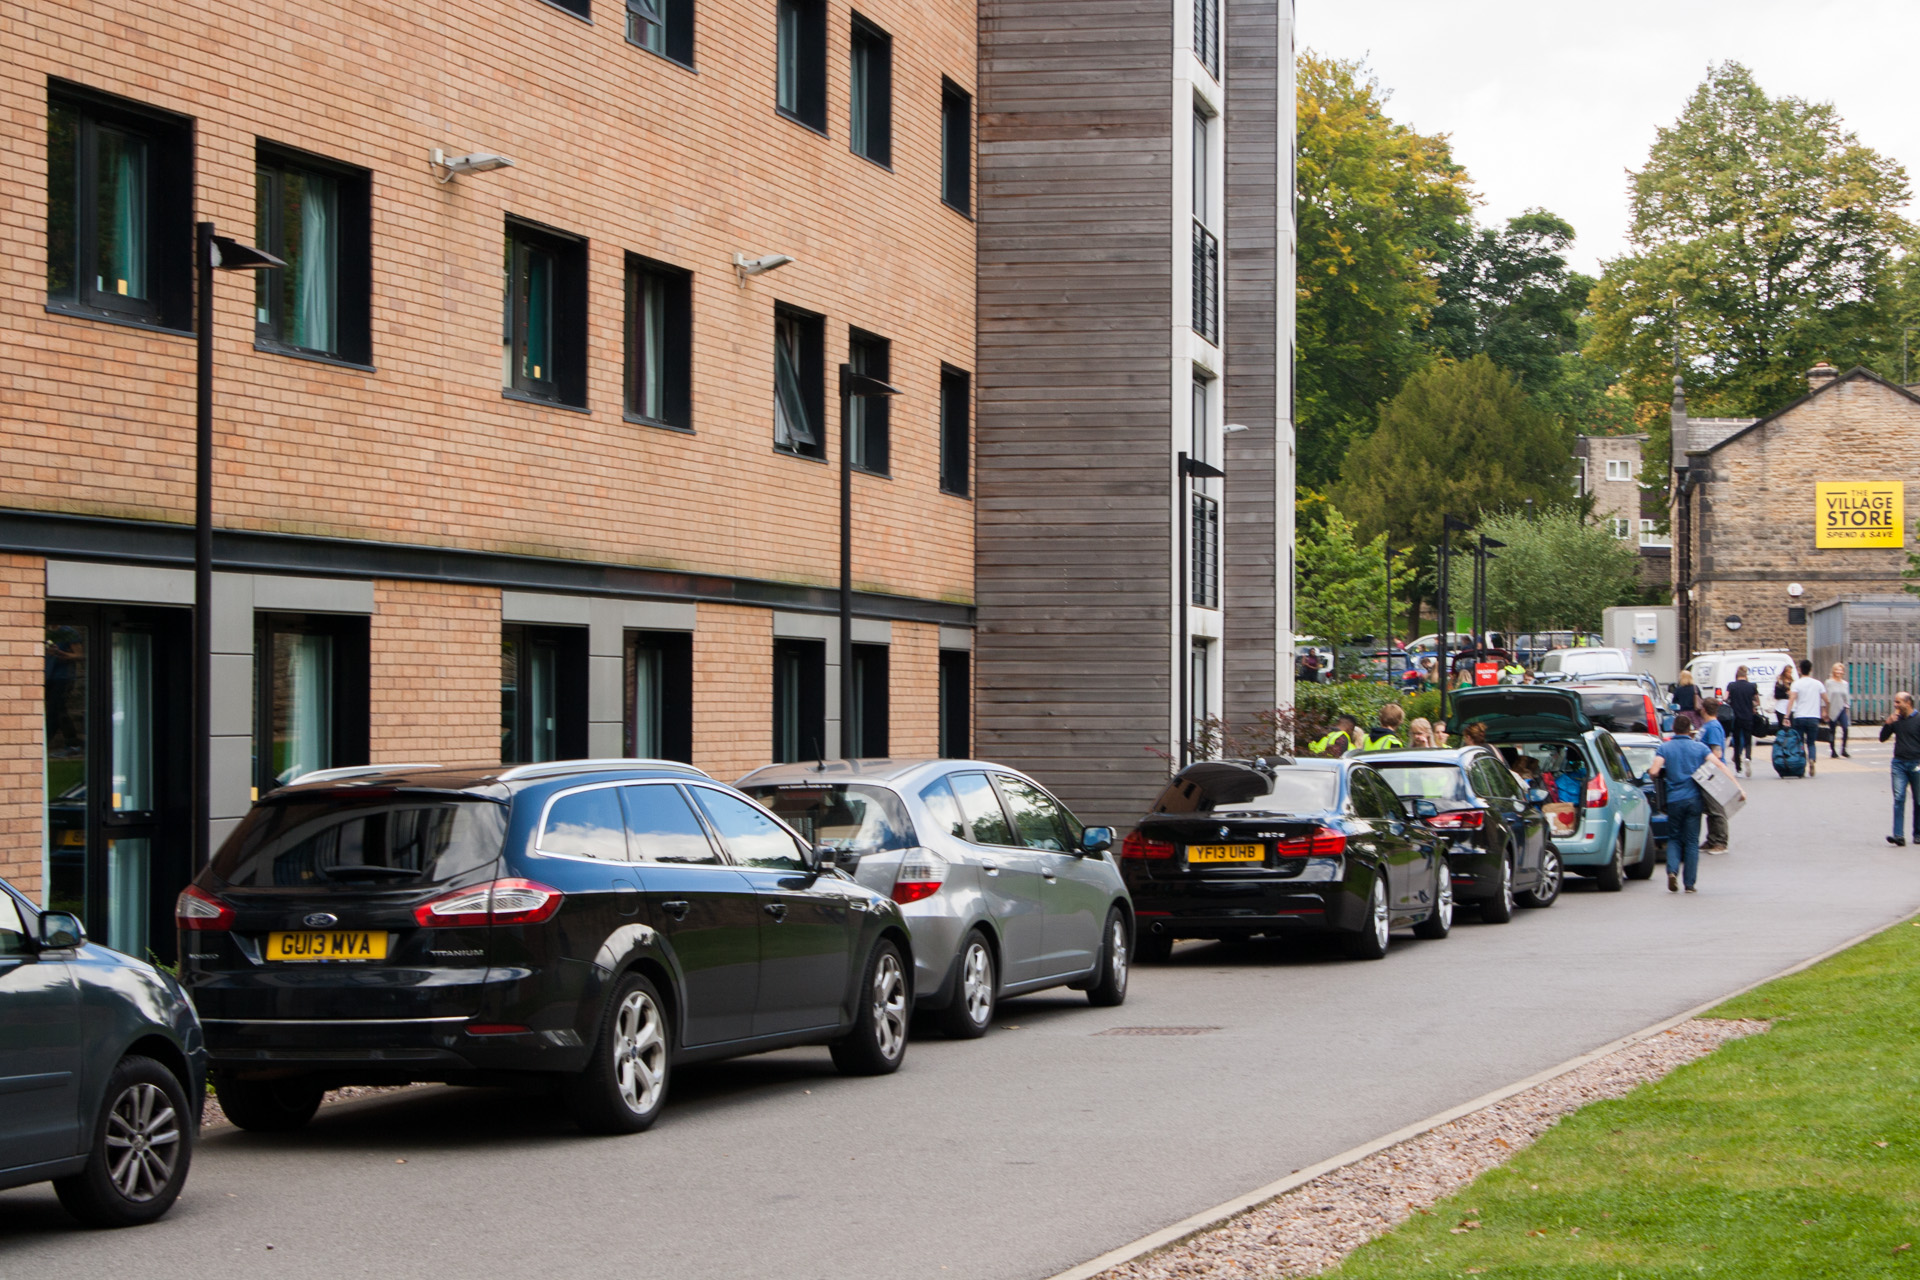 Cars, in the process of being unloaded, line up outside the Endcliffe Student Village apartment blocks. [PHOTO: © Andrew Burdett 2015 | REF: LRxprt-IMG_8394_ARB]